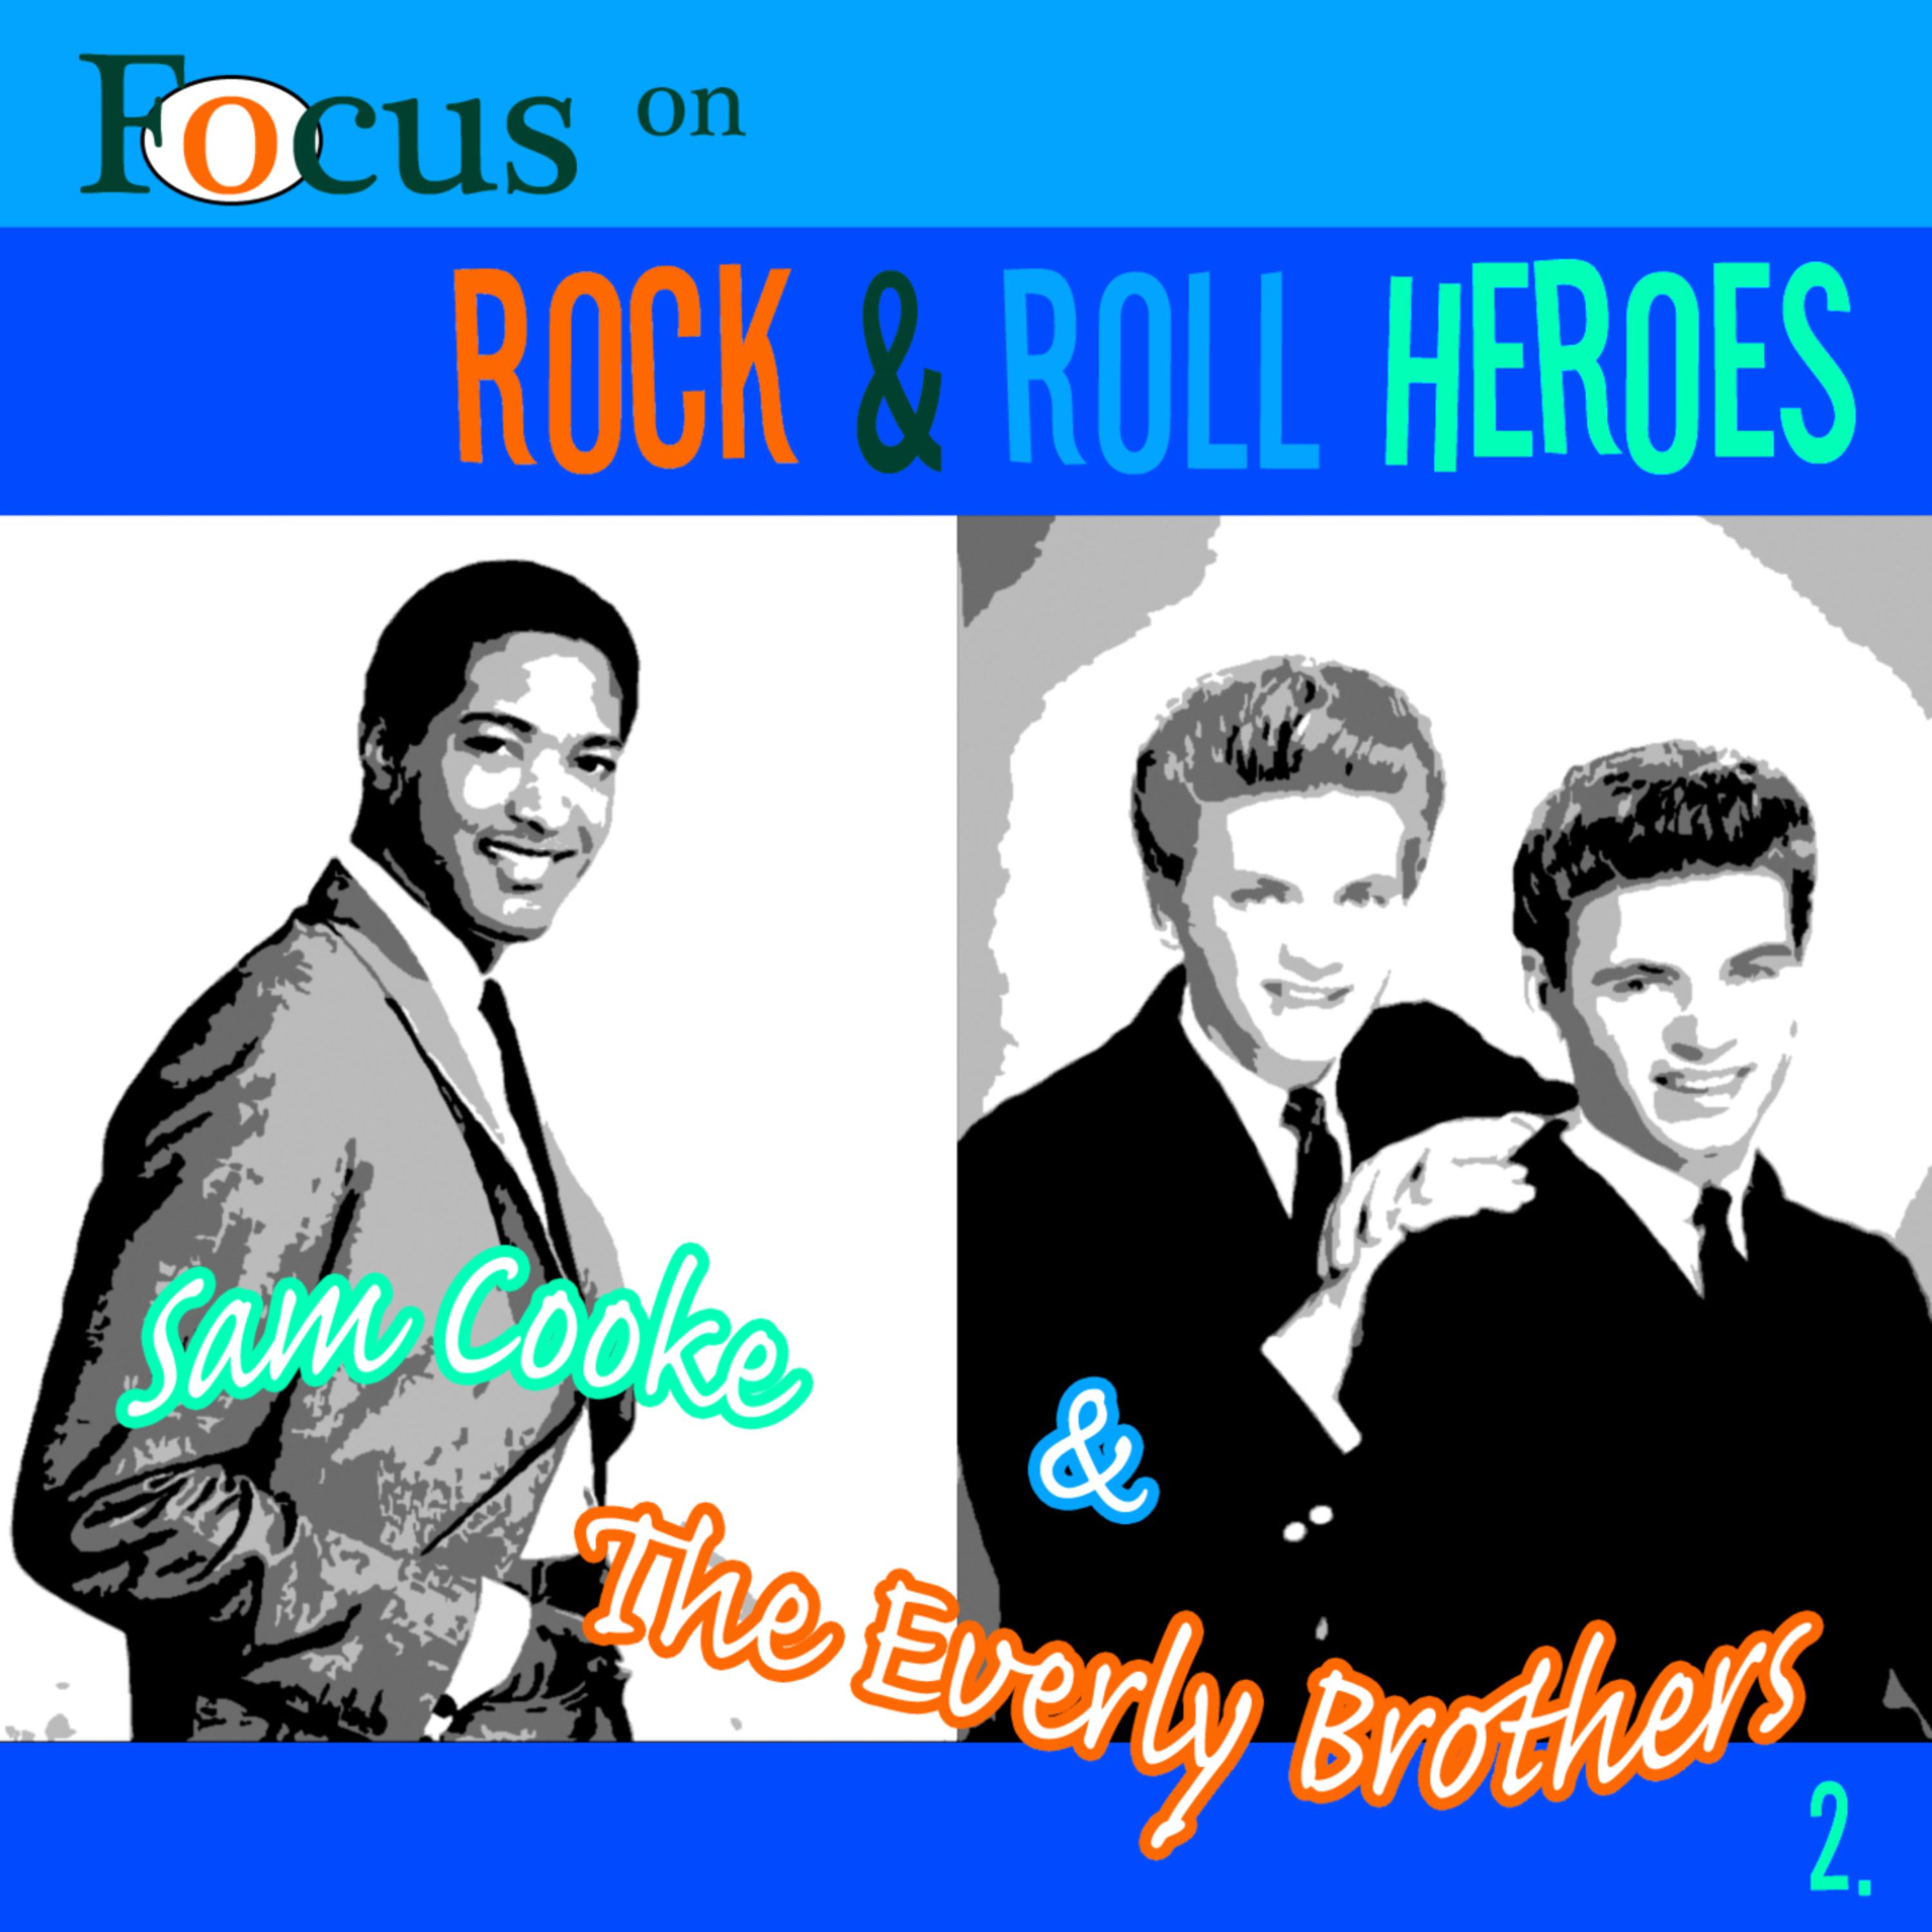 Focus On Rock & Pop Heroes - Sam Cooke & The Everley Brothers 2